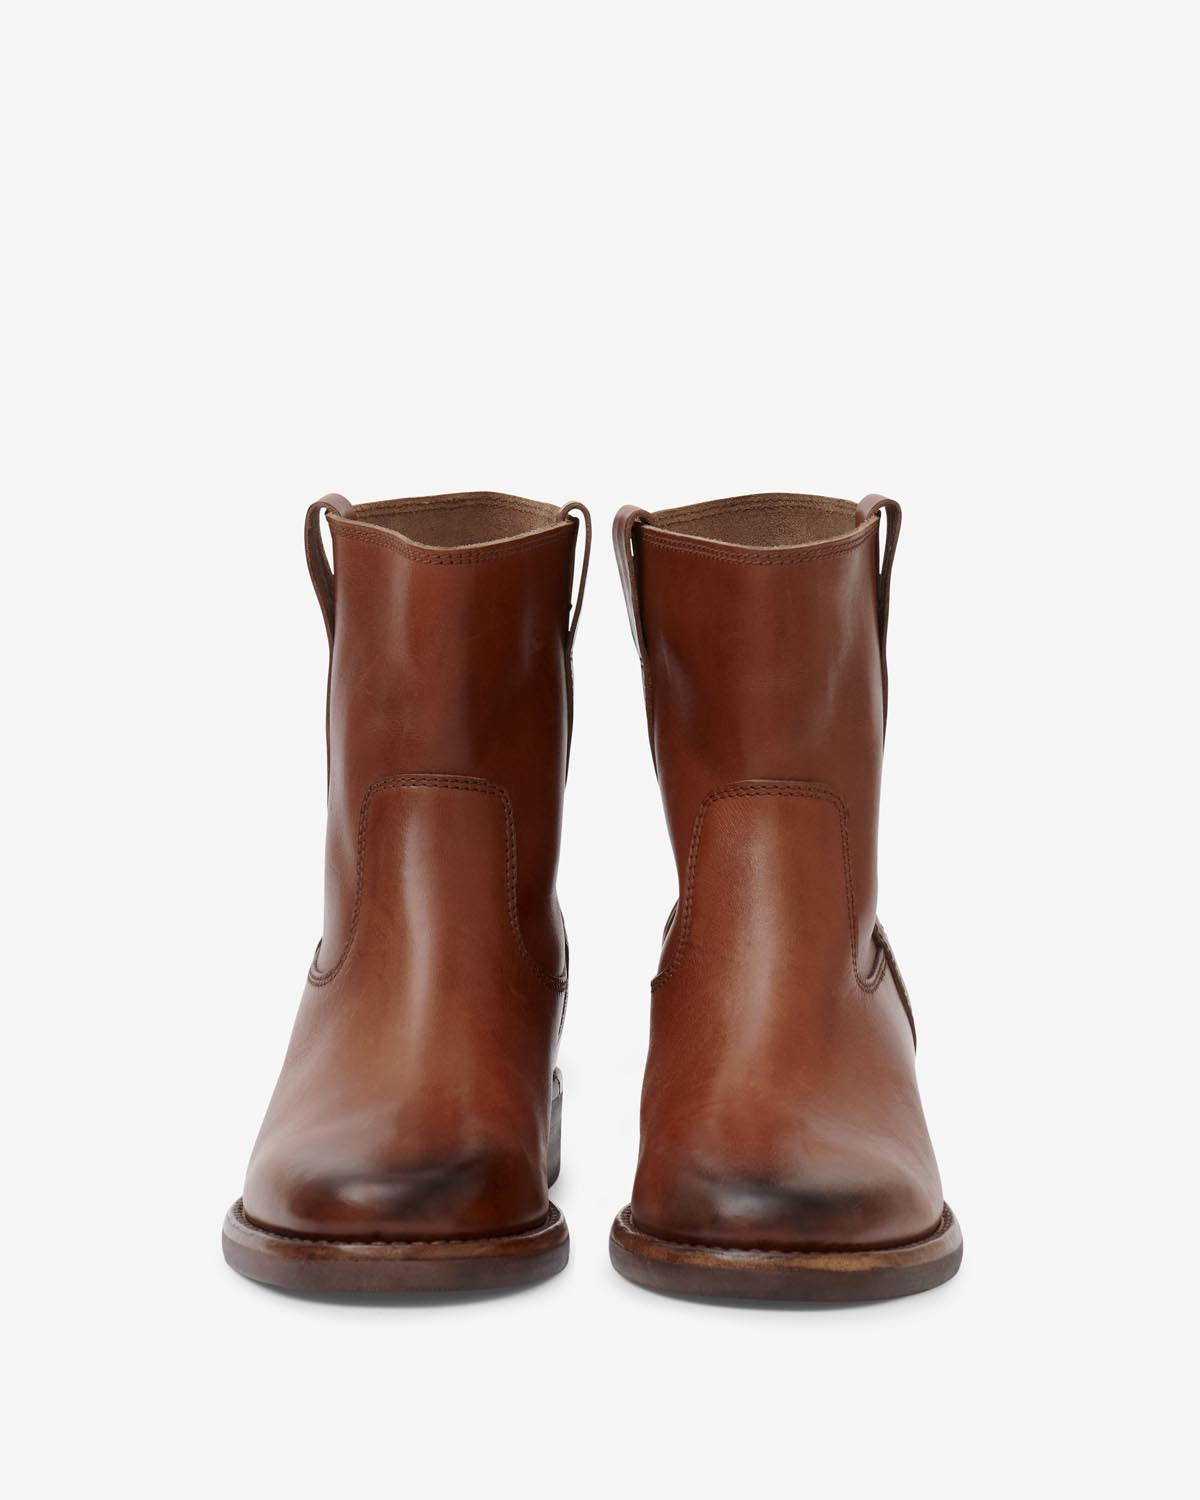 Boots susee Woman Cognac 1